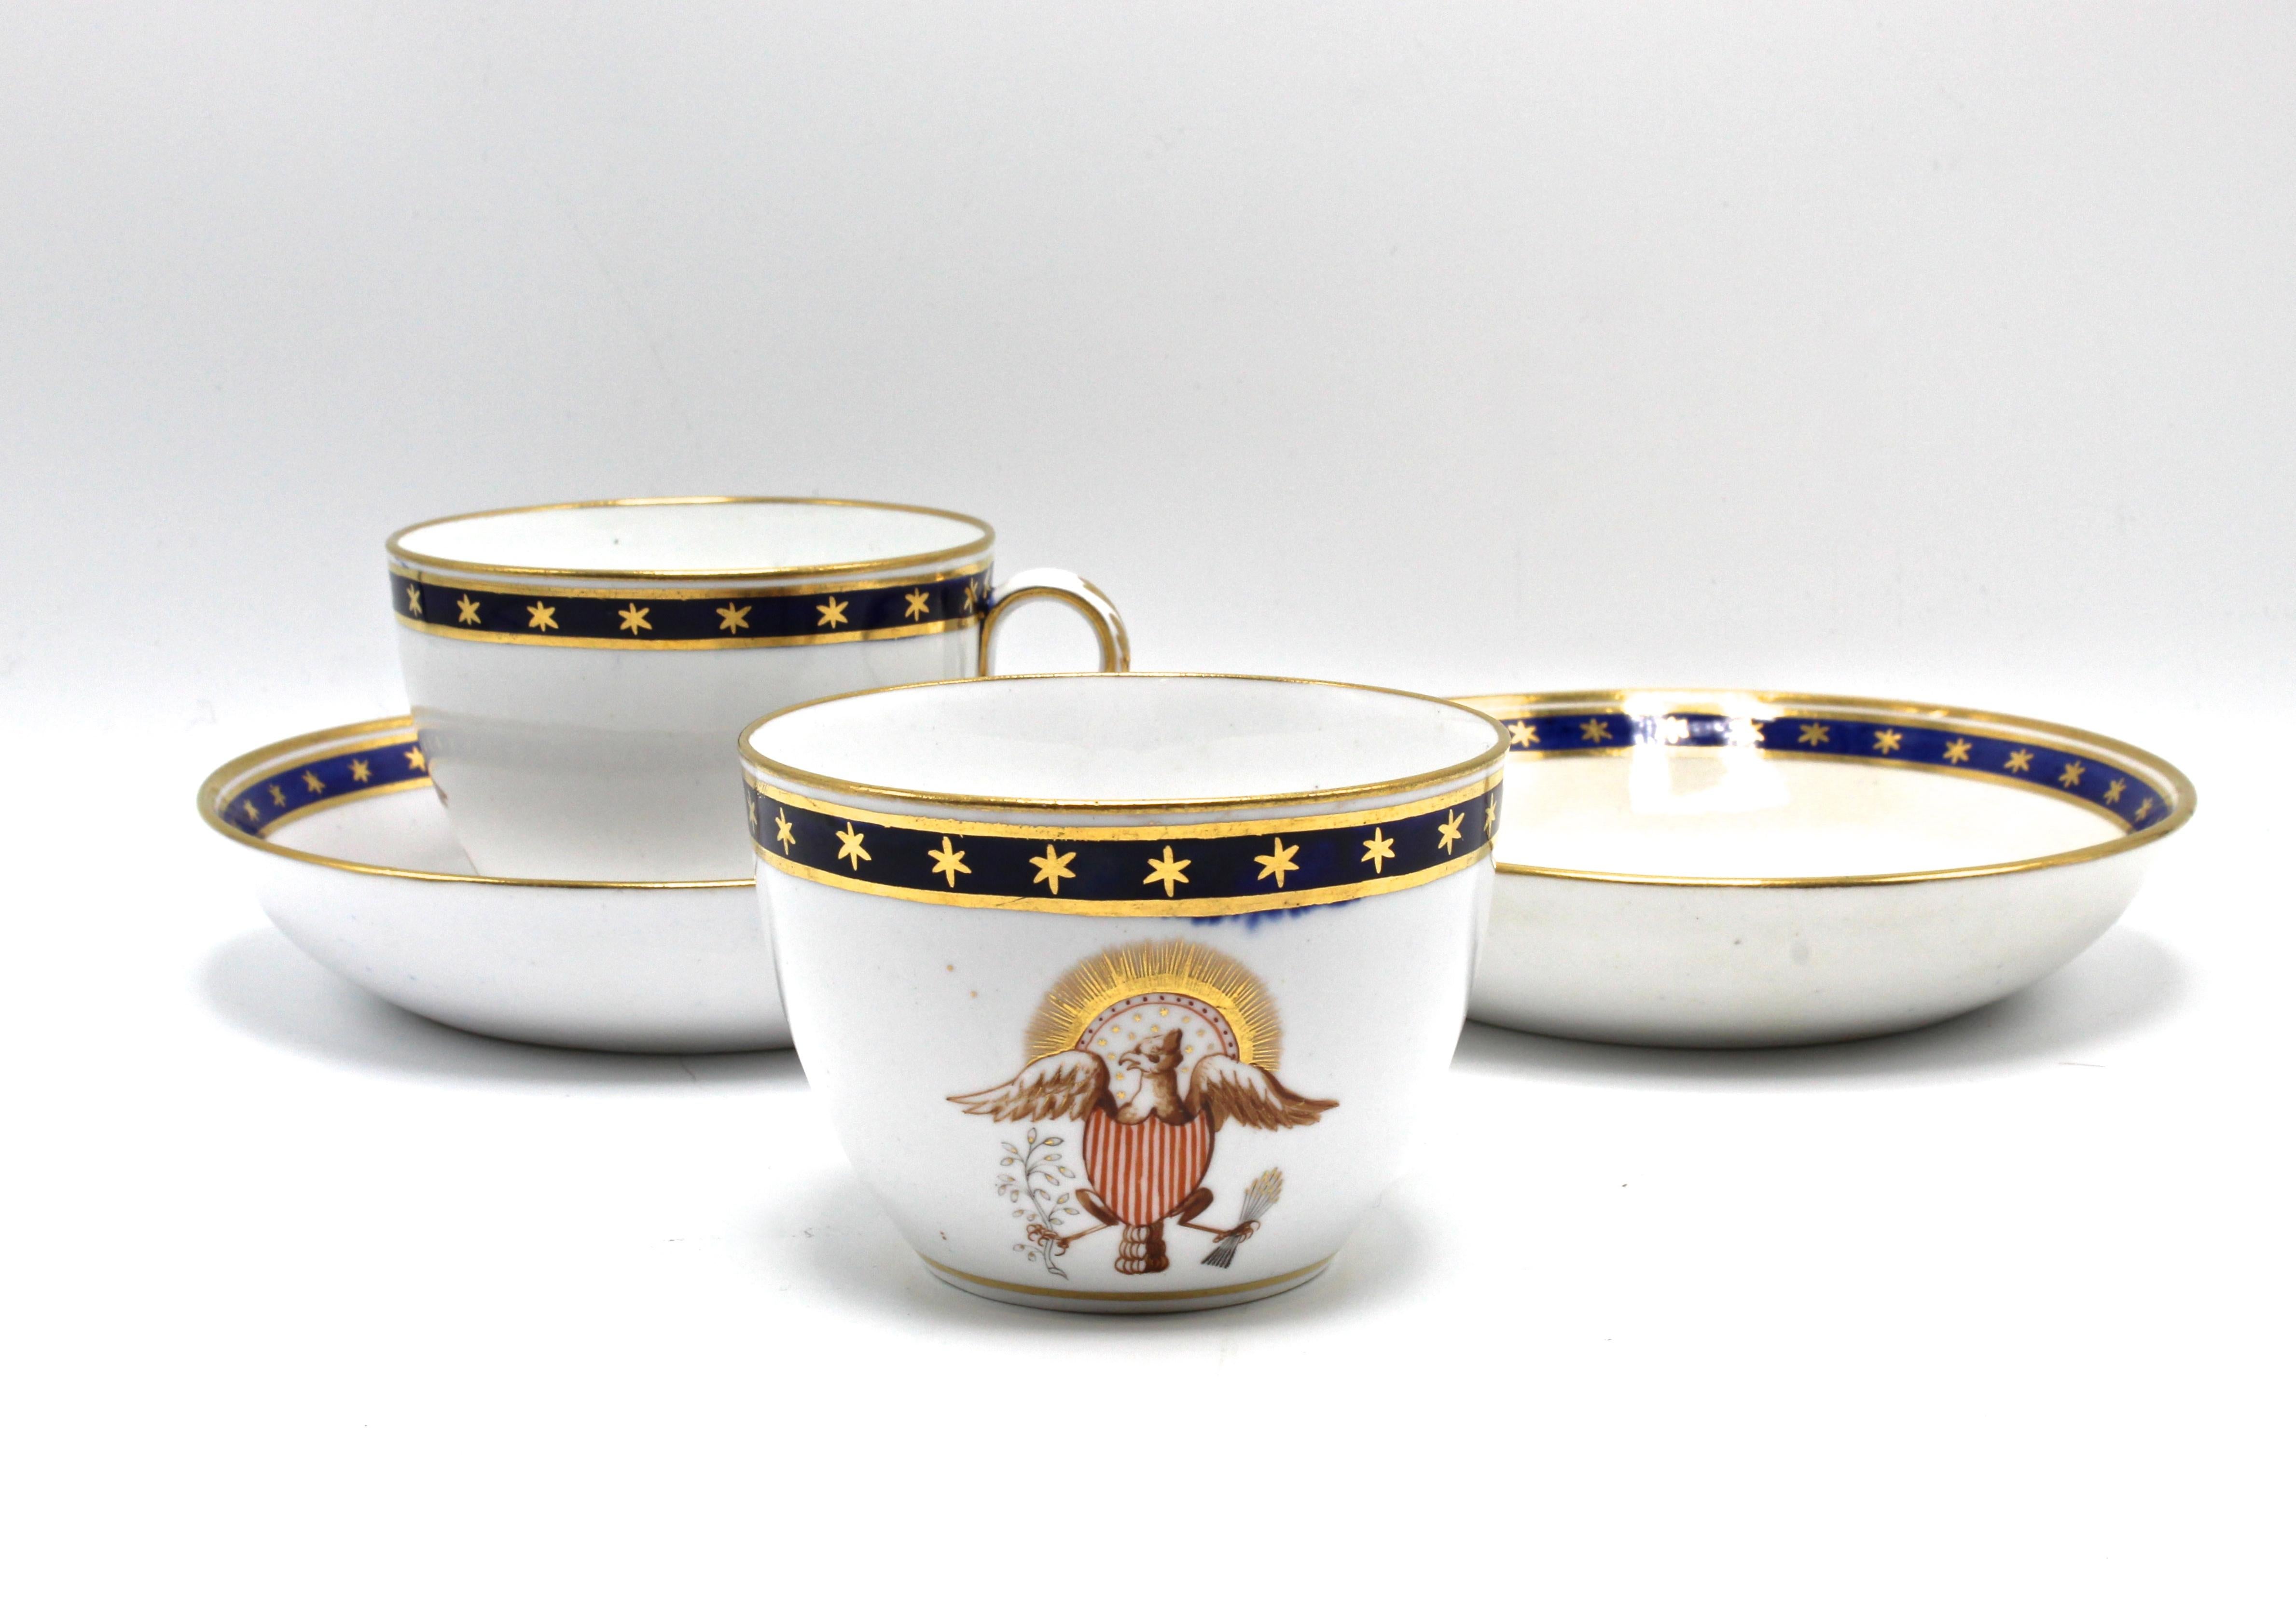 Porcelain Pair of Patriotic American Eagle Teacups and Saucers, Circa 1840s